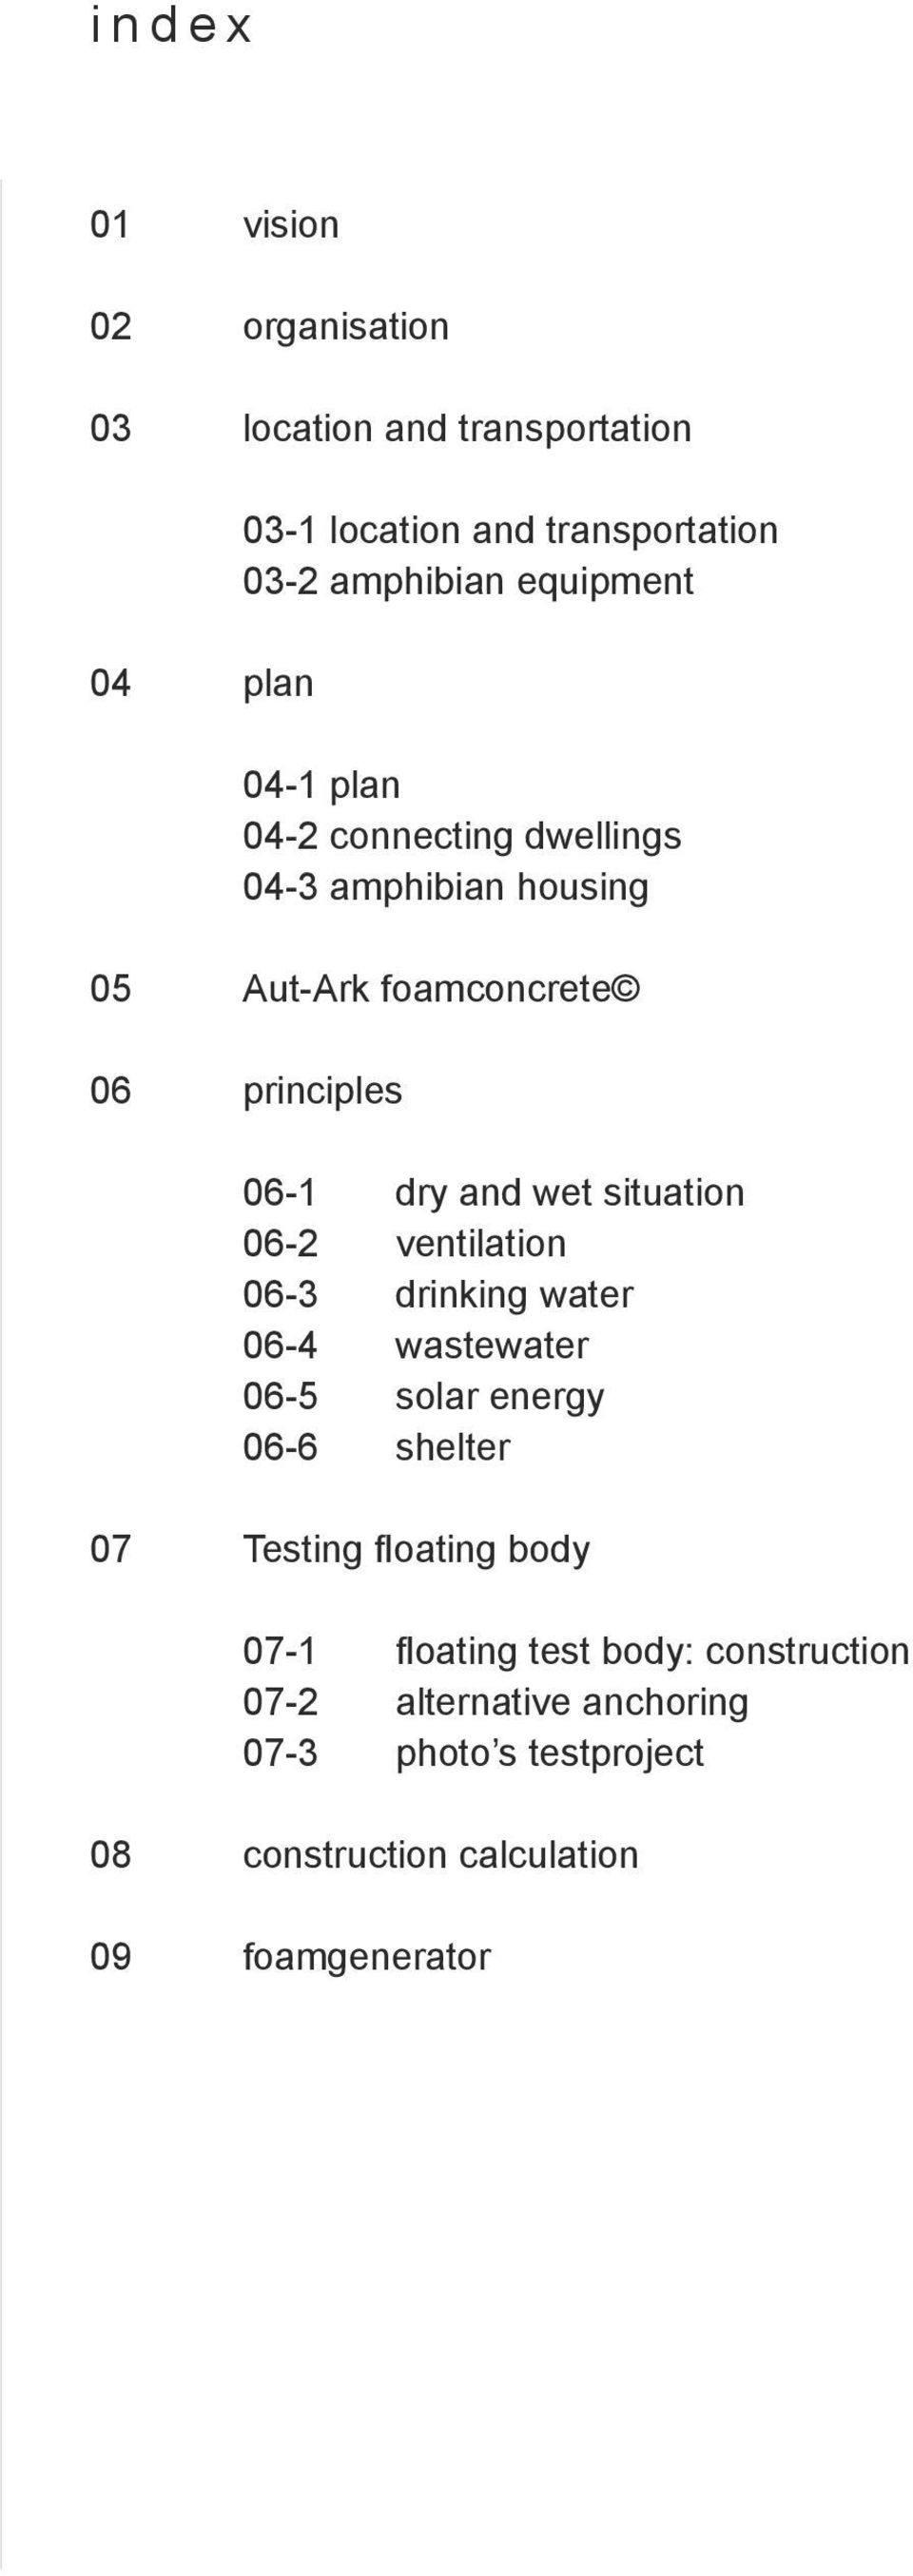 situation 06-2 ventilation 06-3 drinking water 06-4 wastewater 06-5 solar energy 06-6 shelter 07 Testing floating body 07-1